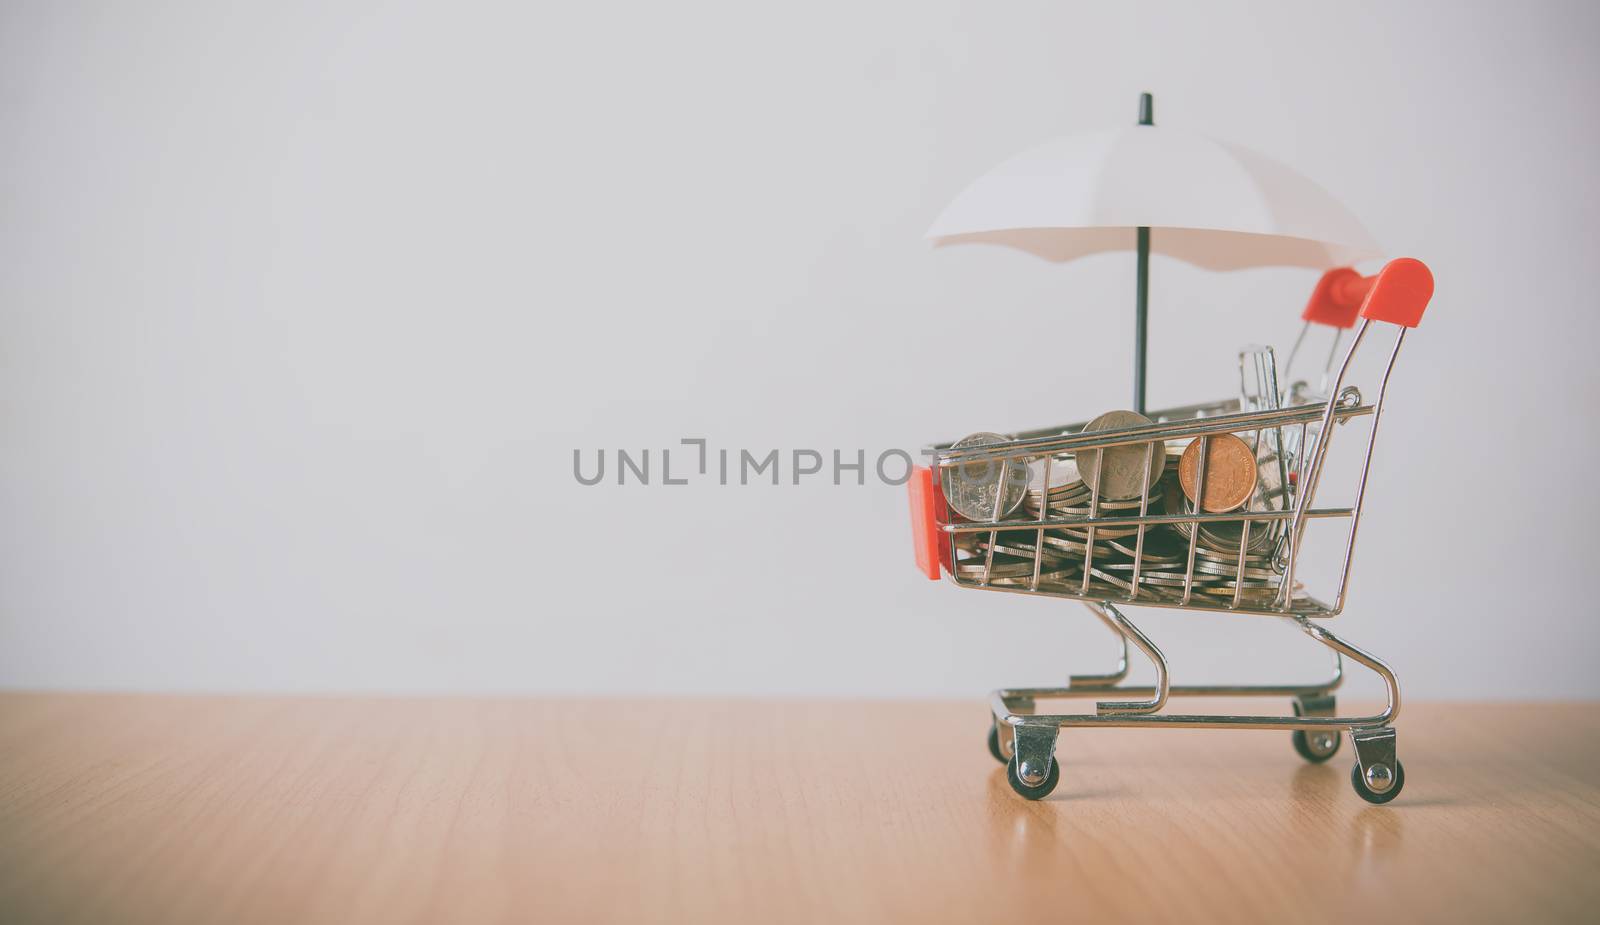 Umbrella is on the currency, the coin is in a shopping cart that is placed on the wooden floor. The concept of protection and protection and safety supervision in business